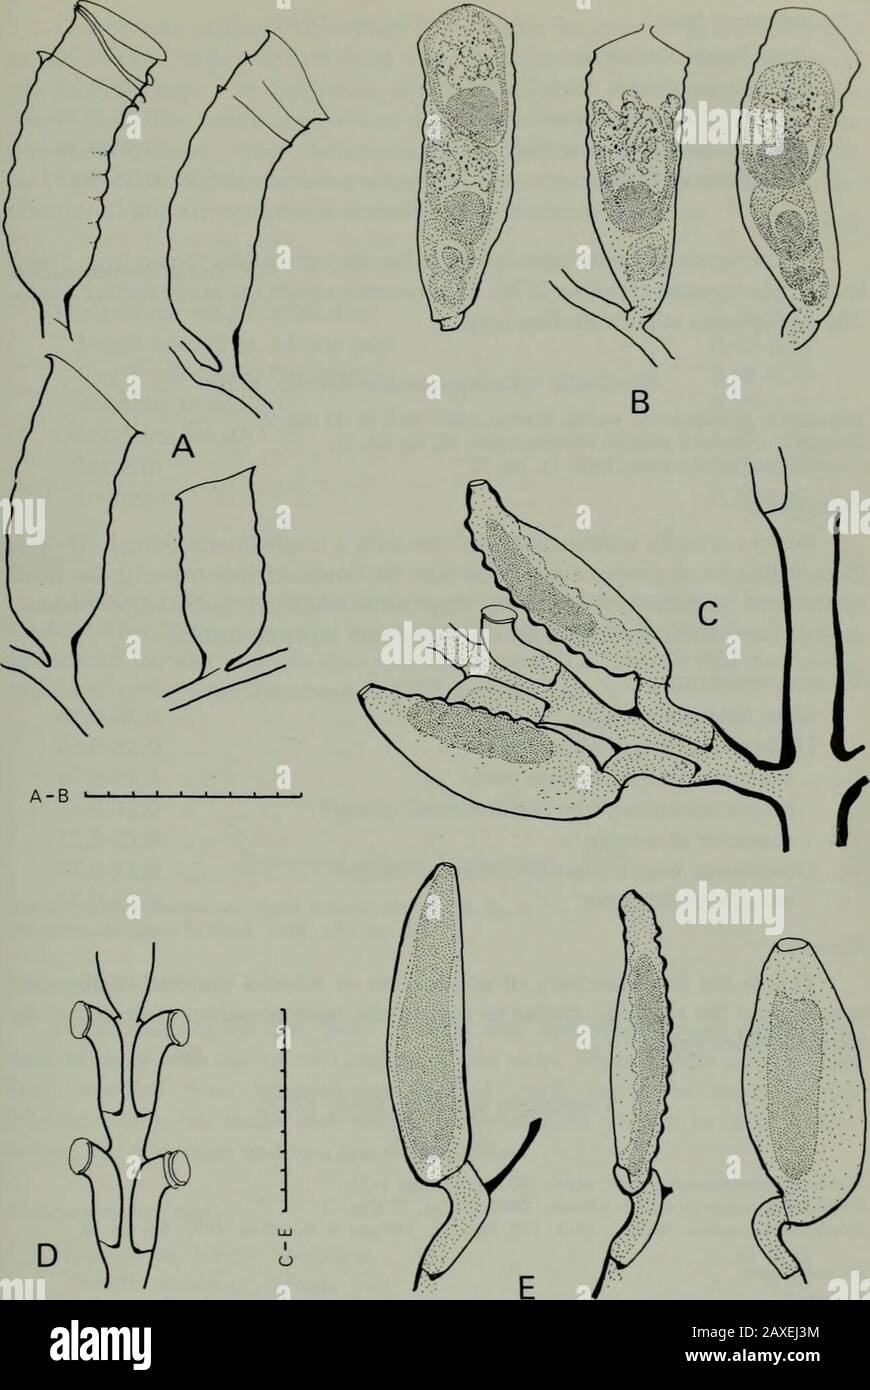 Annals of the South African MuseumAnnale van die Suid-Afrikaanse Museum . marginal tentacles and a varying numberof ocelli (usually eight). Measurements (mm) Pedicel length 0,08-0,17 Hydrotheca. depth, convex side diameter at mouth diameter depthGonotheca, length maximum diameter.. 0,82-1,200,35-0,530,37-0,501,04-1,420,38-0,53 Scandia tubitheca sp. nov. Scandia corrugata: Millard & Bouillon, 1973: 60, fig. 8D-F (fertile colony only). Holotype: fertile colony from Amirante, Seychelles, epizootic on Syntheciumdentigerum. Diagnosis Hydrotheca similar to that of Hebella muscensis. Gonotheca (only Stock Photo